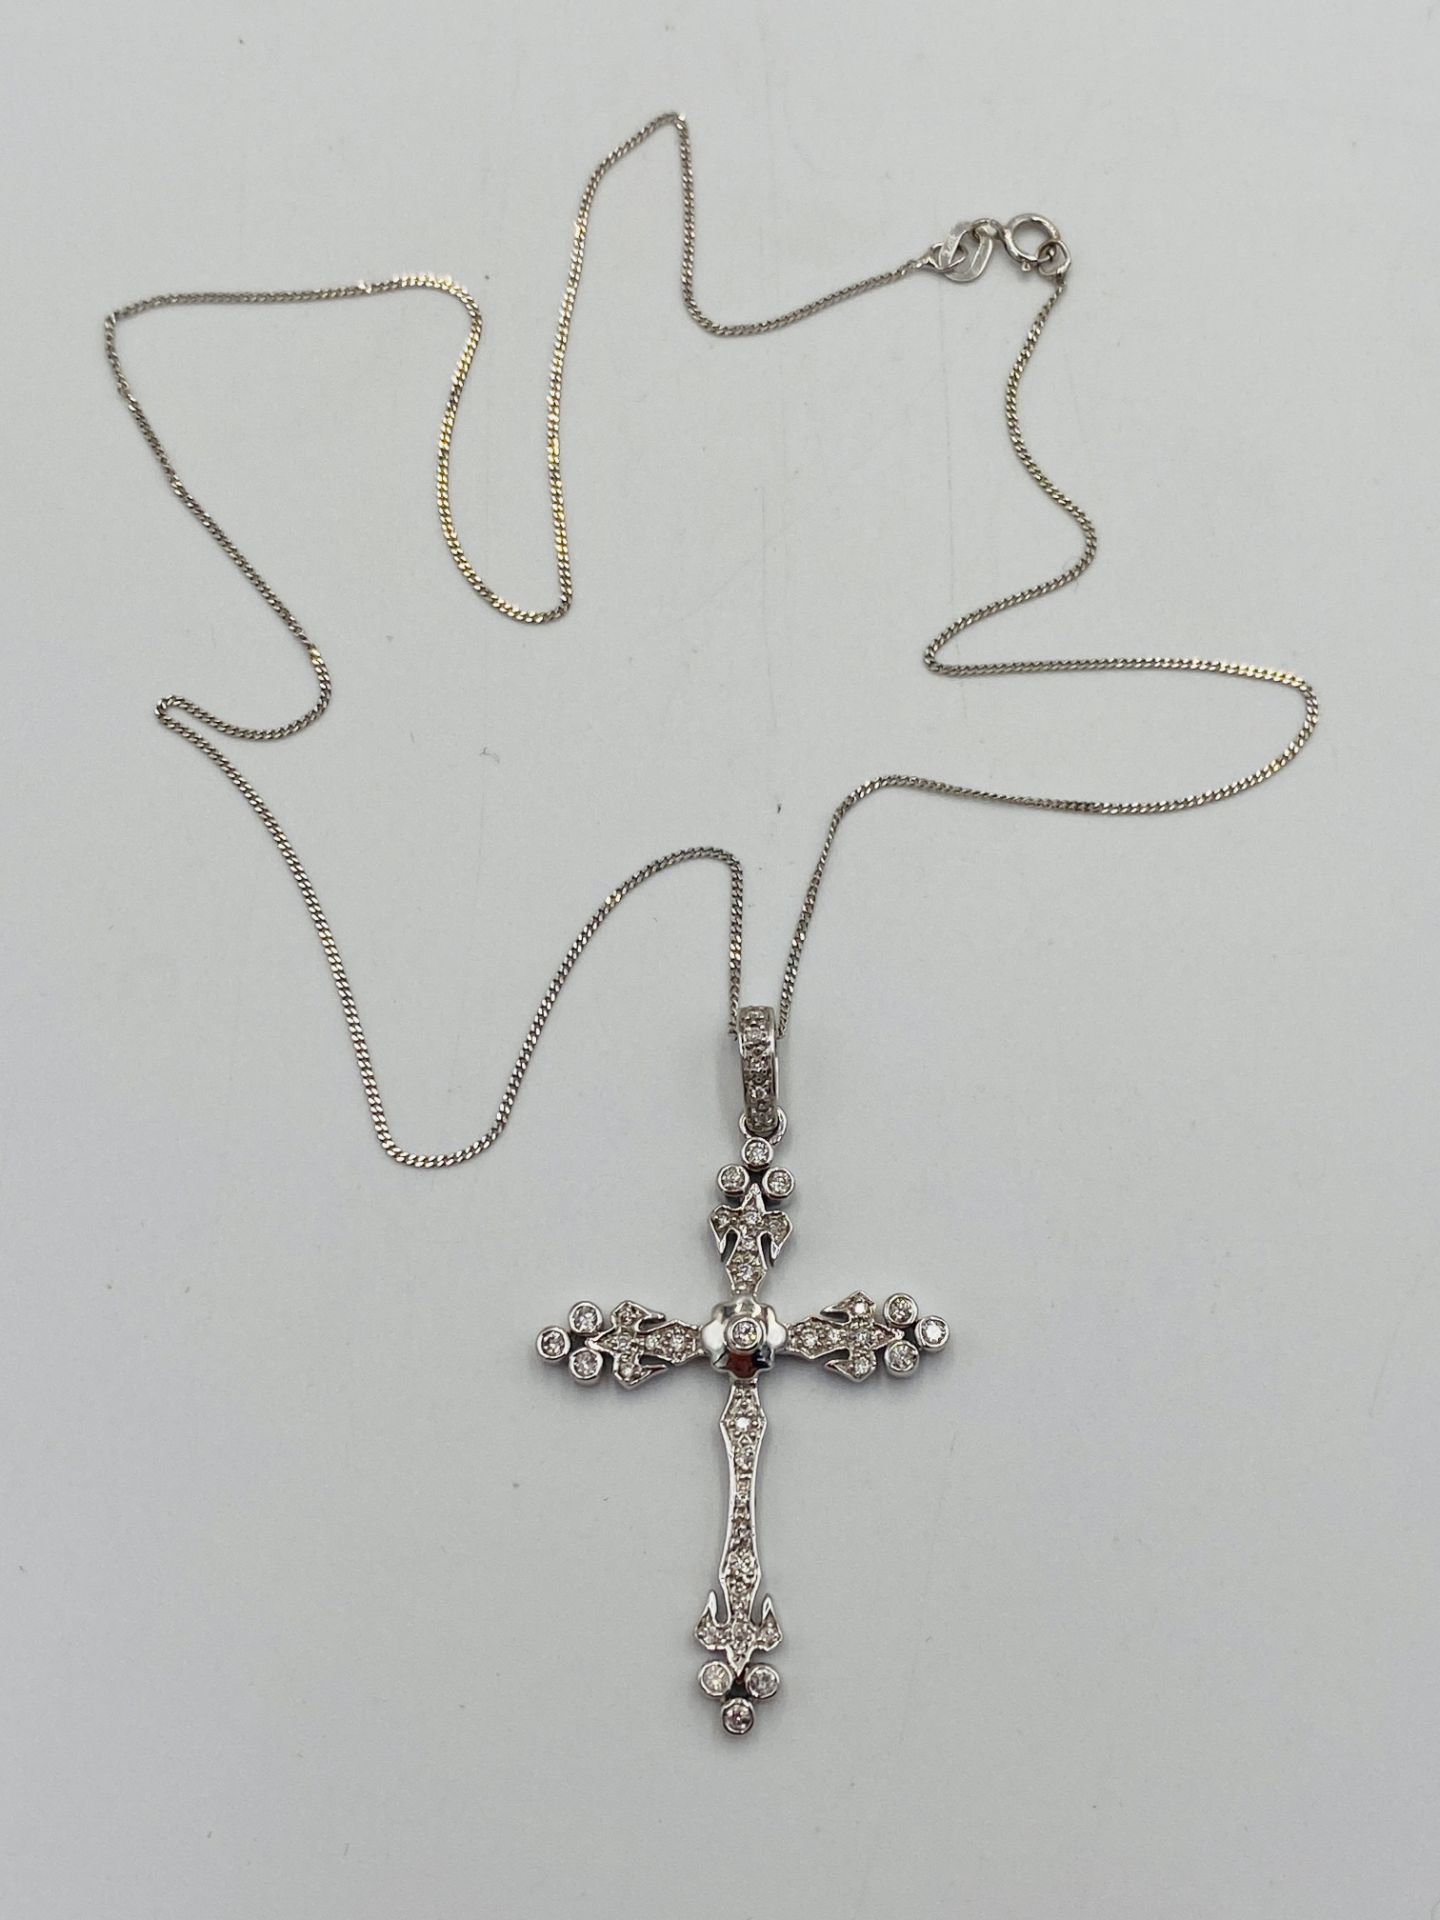 9ct gold and diamond set cross on 9ct gold chain - Image 2 of 4